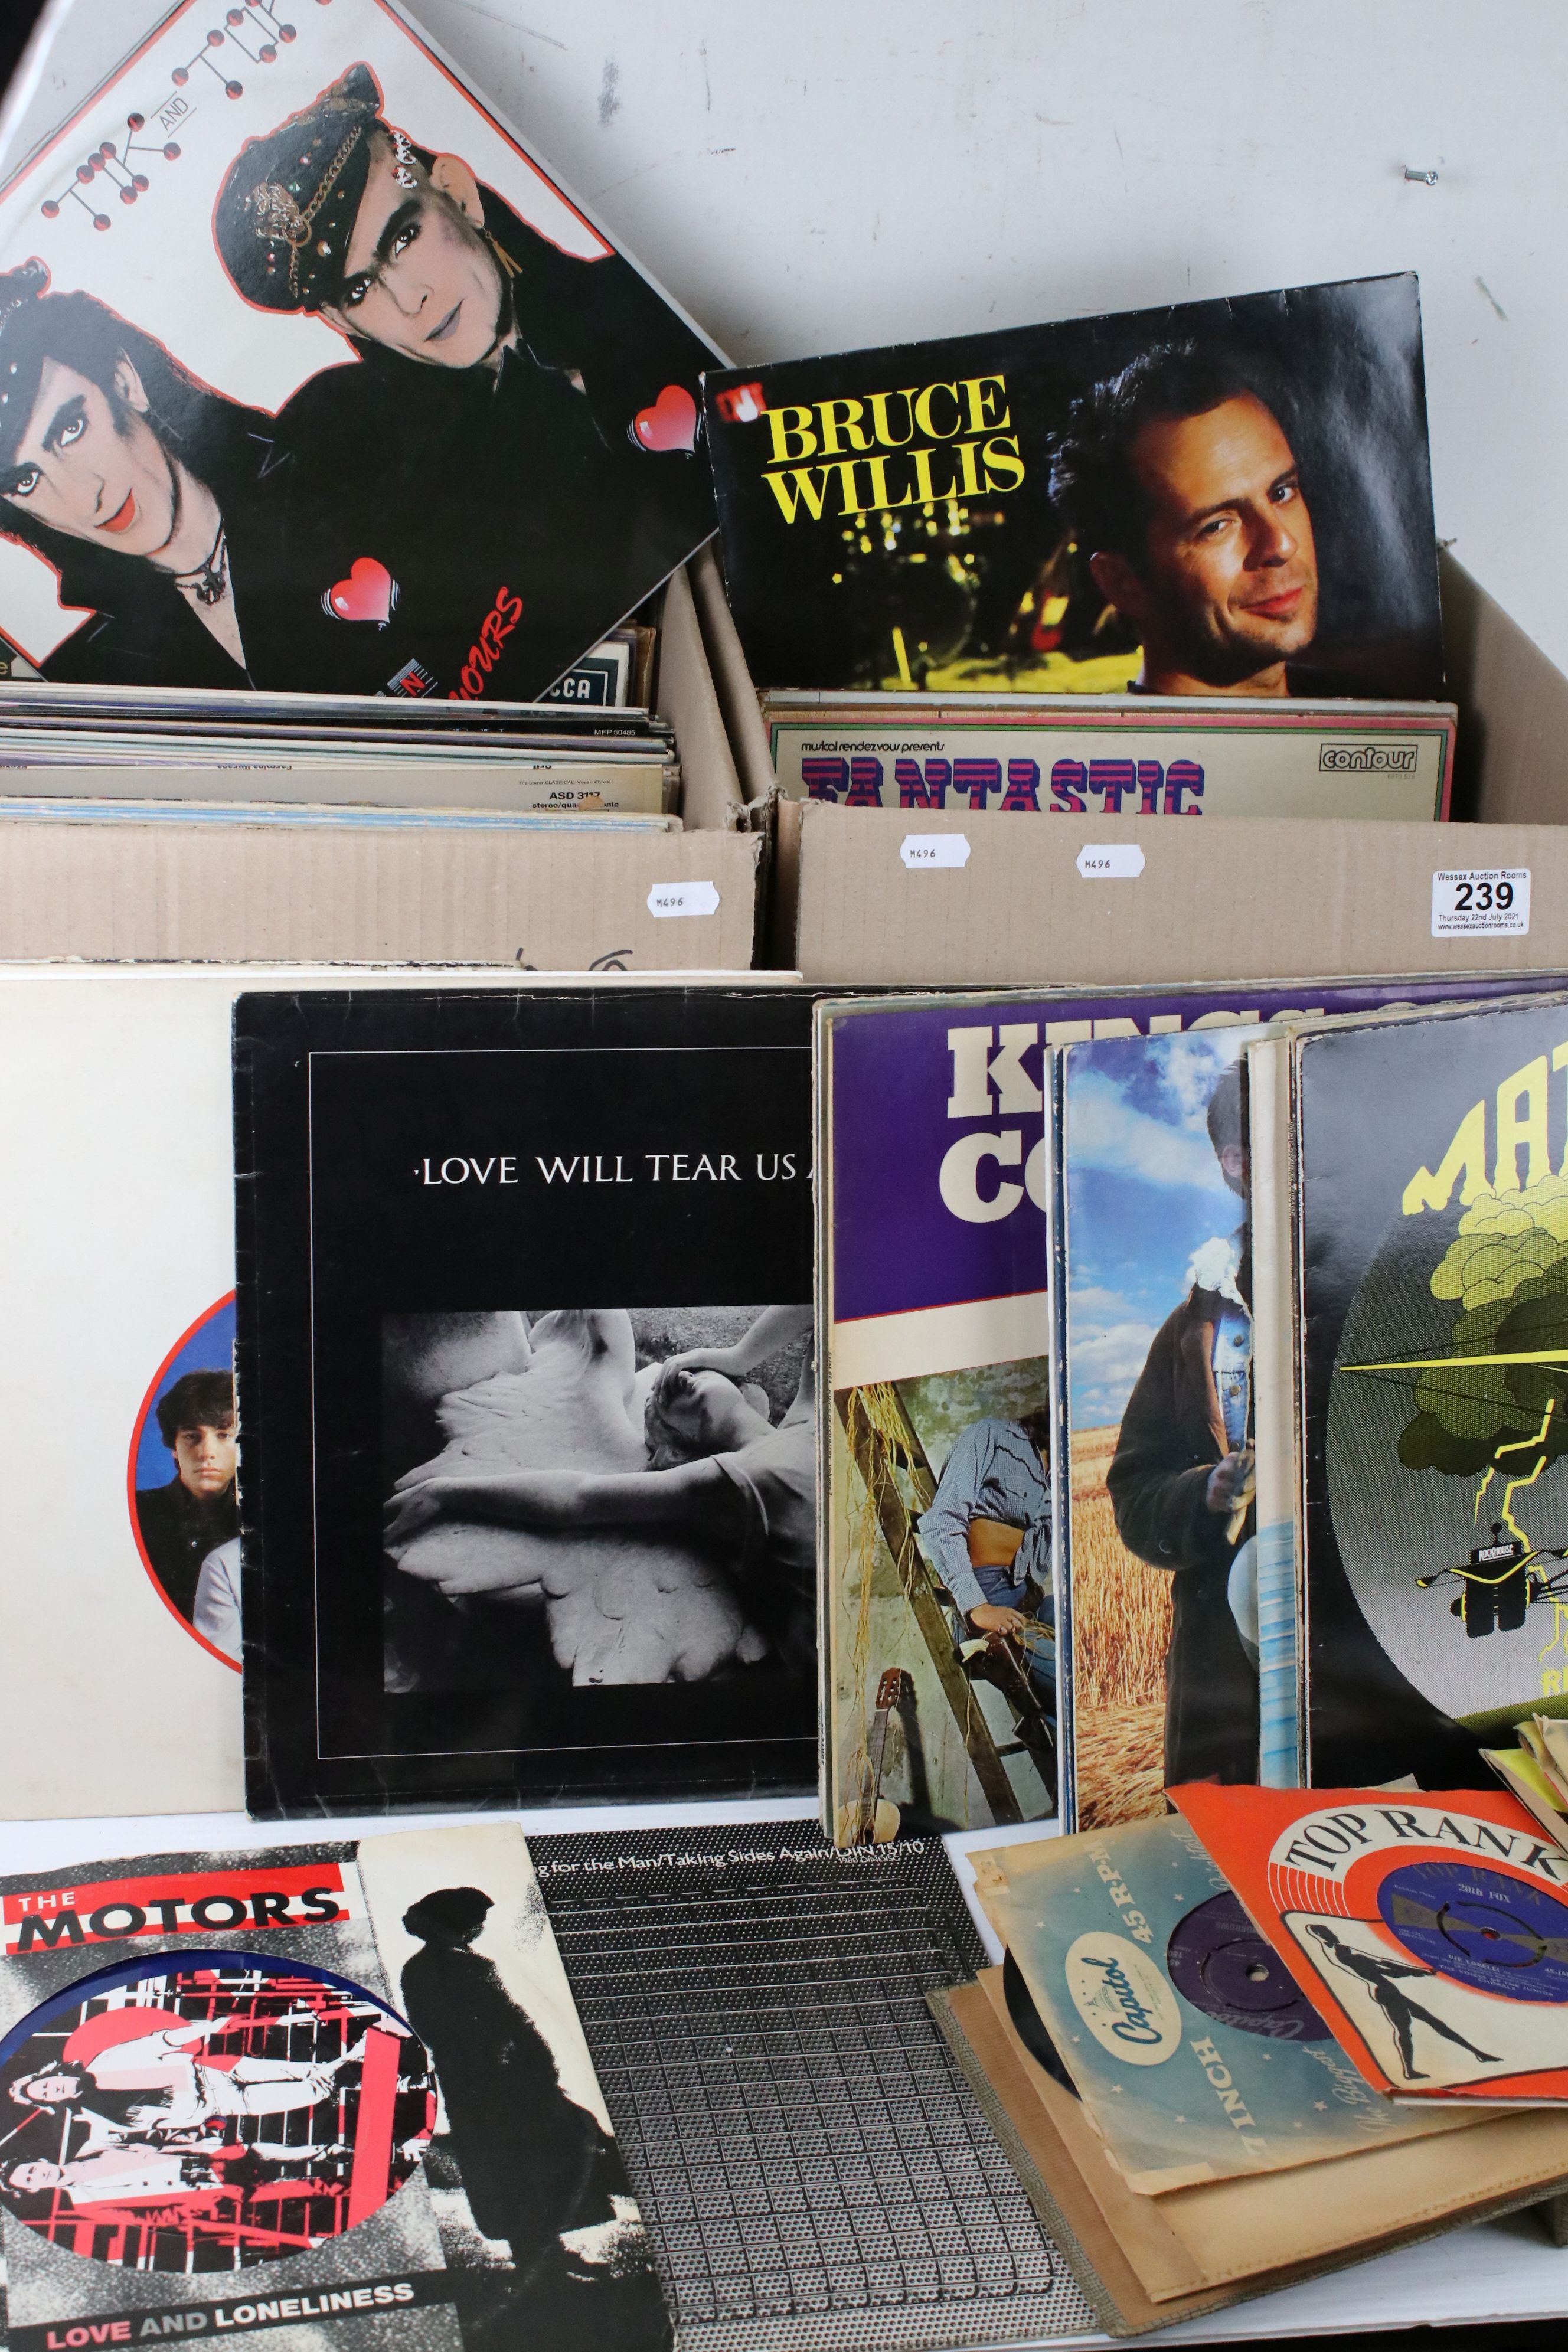 Vinyl - Collection of over 100 LP's and 12" singles spanning genres and decades featuring Joy